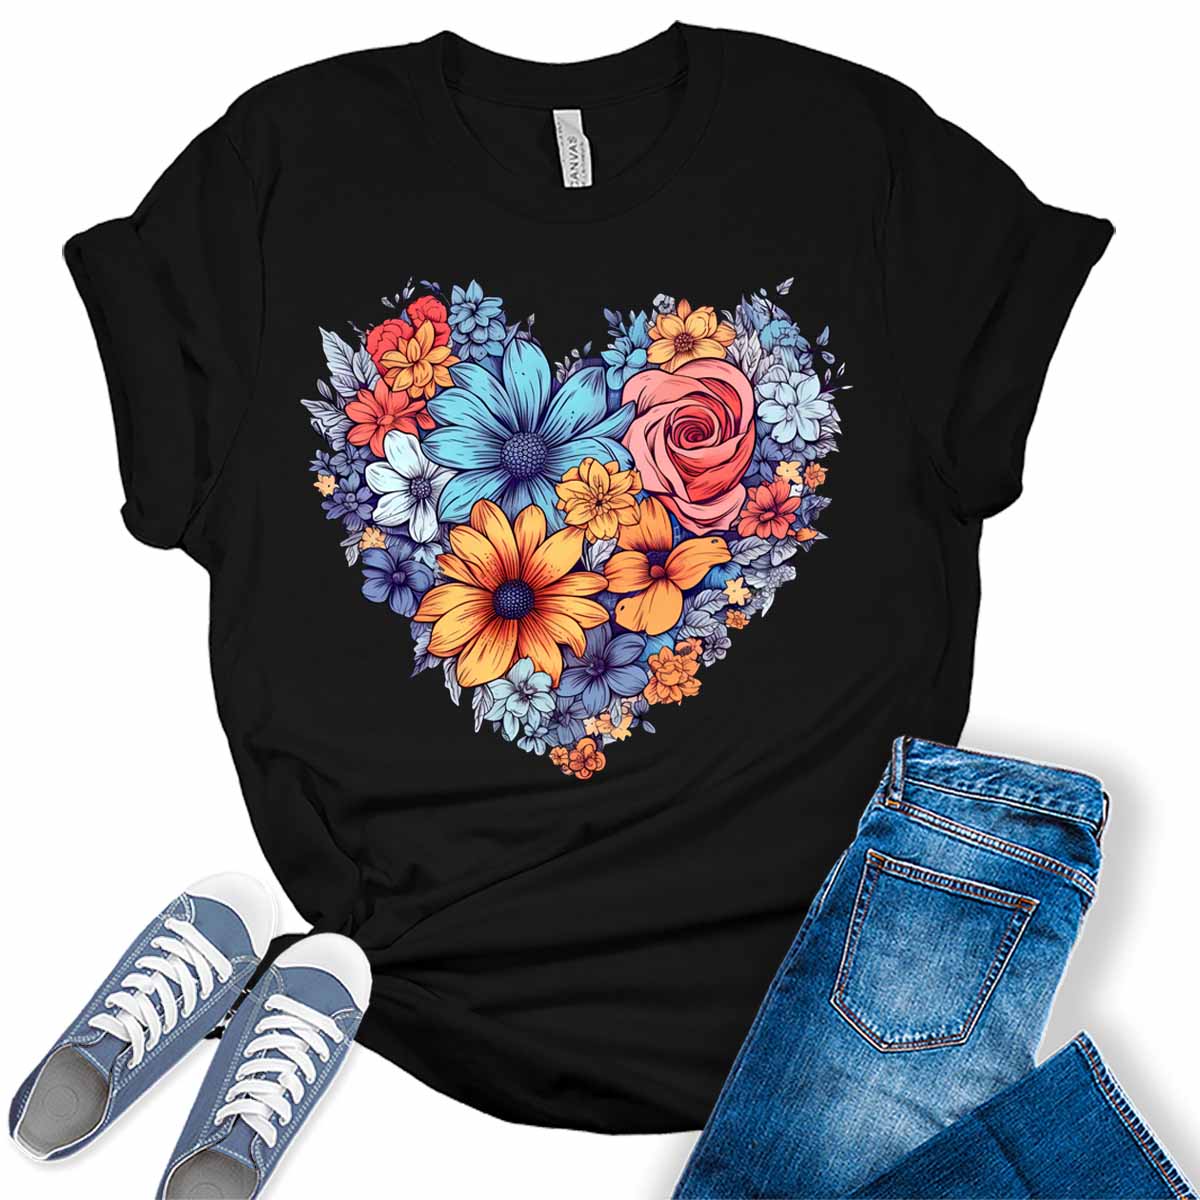 Floral Heart Cute Women's Graphic Tee